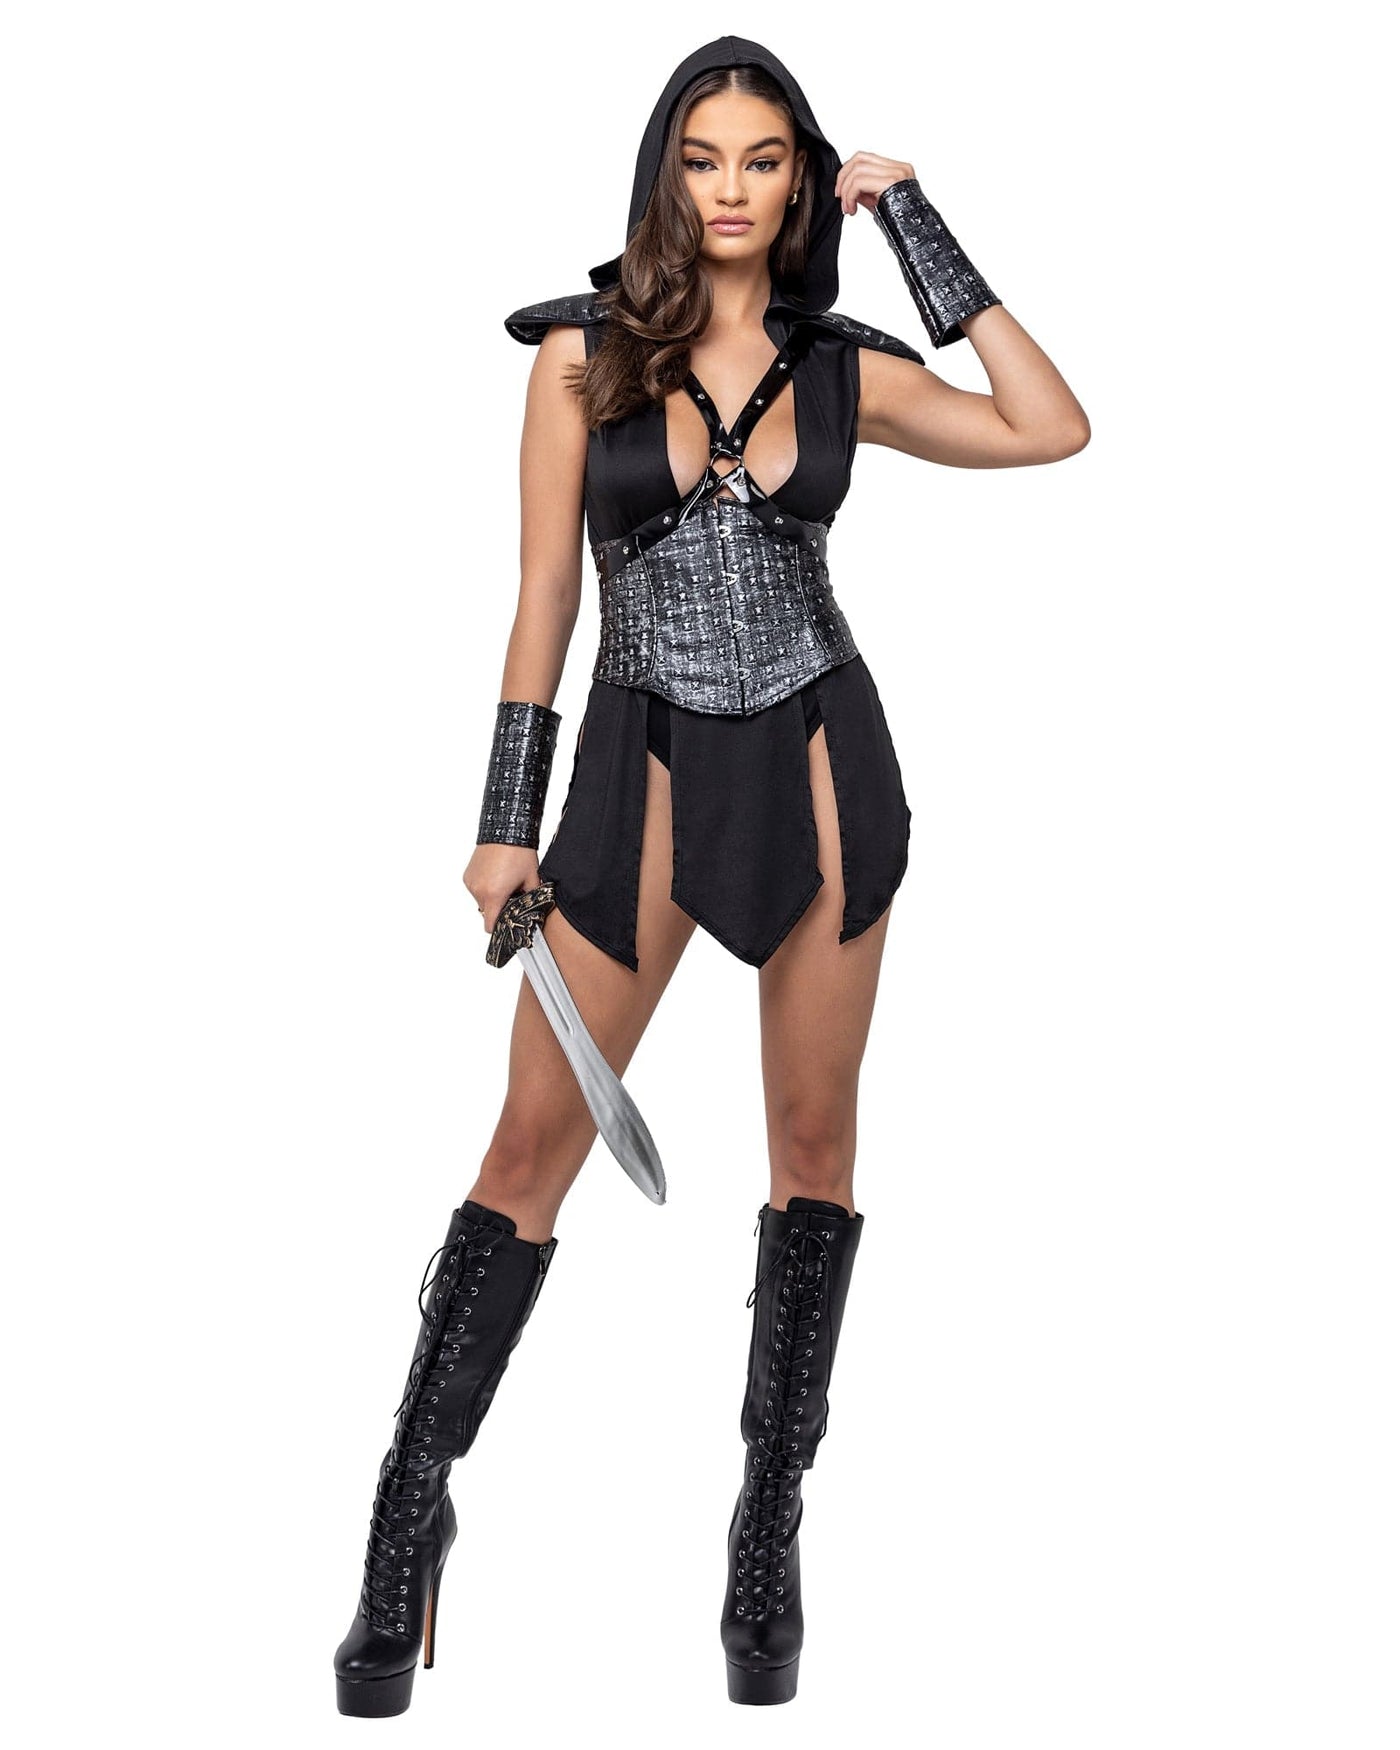 3pc. Dungeon Mistress Women's Costume - For Love of Lingerie